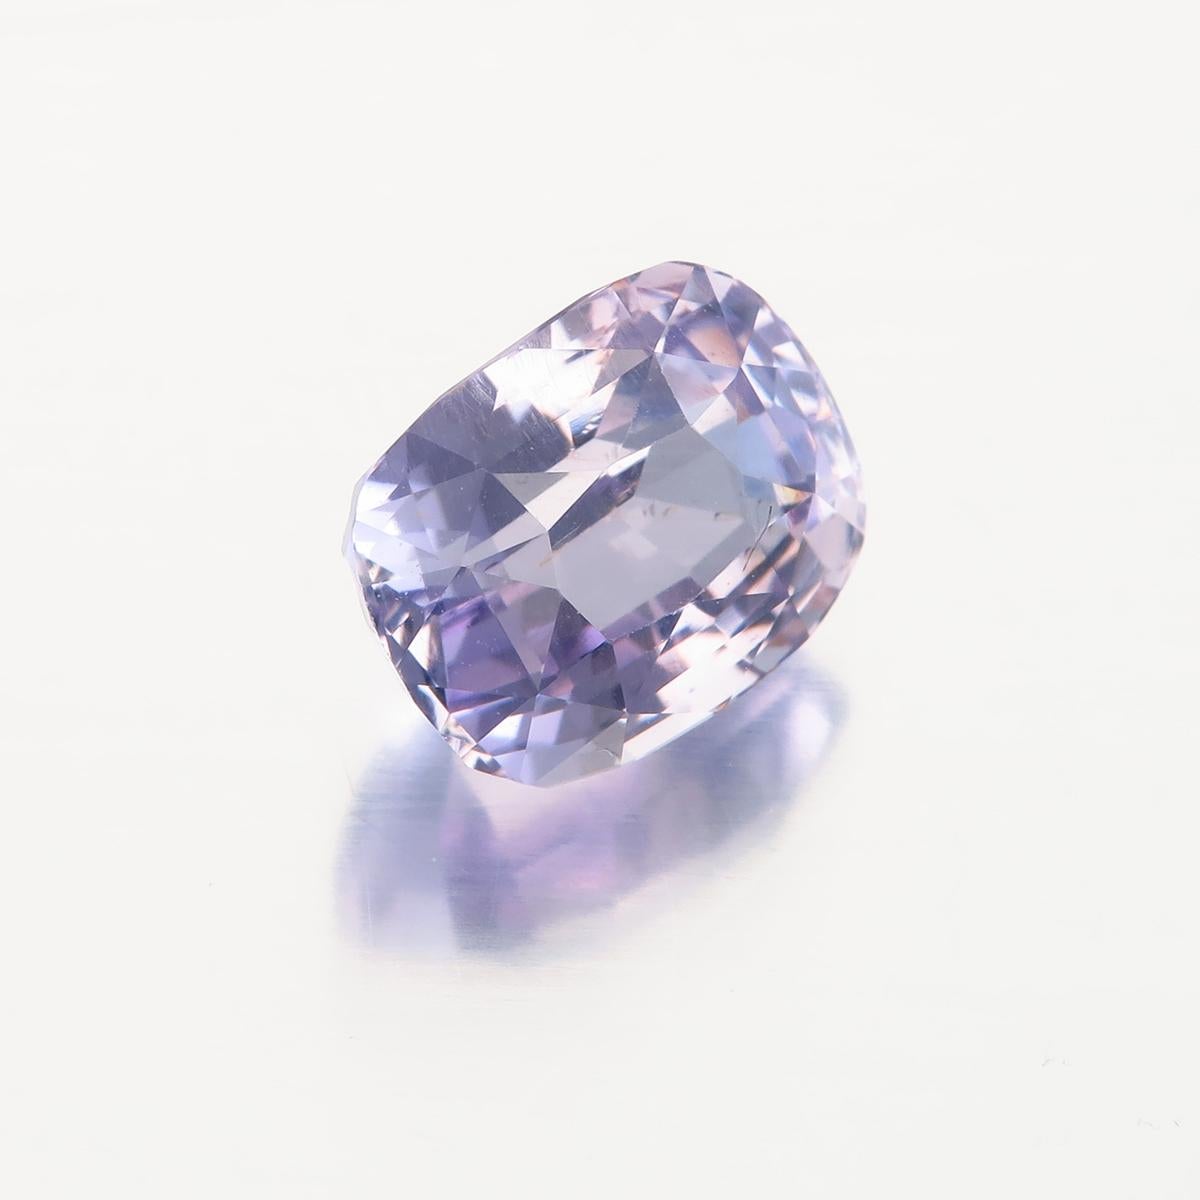 Antique Cushion Cut 2.30 Carat Violet Spinel from Sri Lanka No Heat For Sale